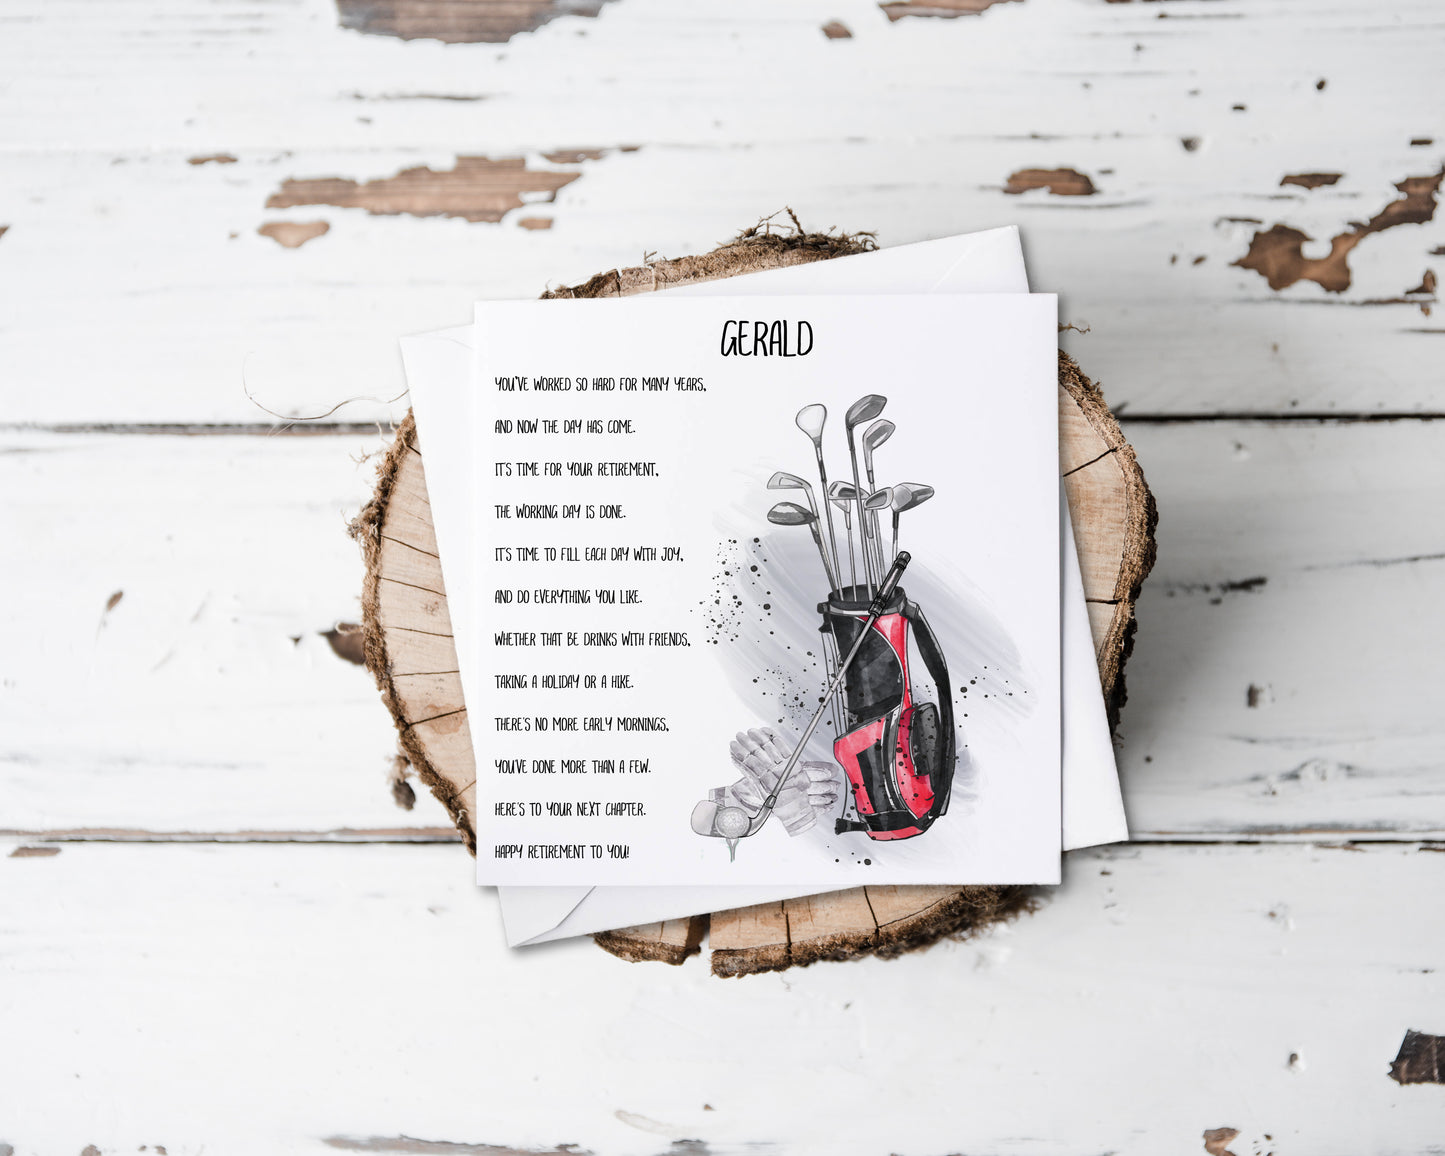 Square retirement greeting card that can be personalised featuring a watercolour design of a golf bag and clubs with a retirement poem.